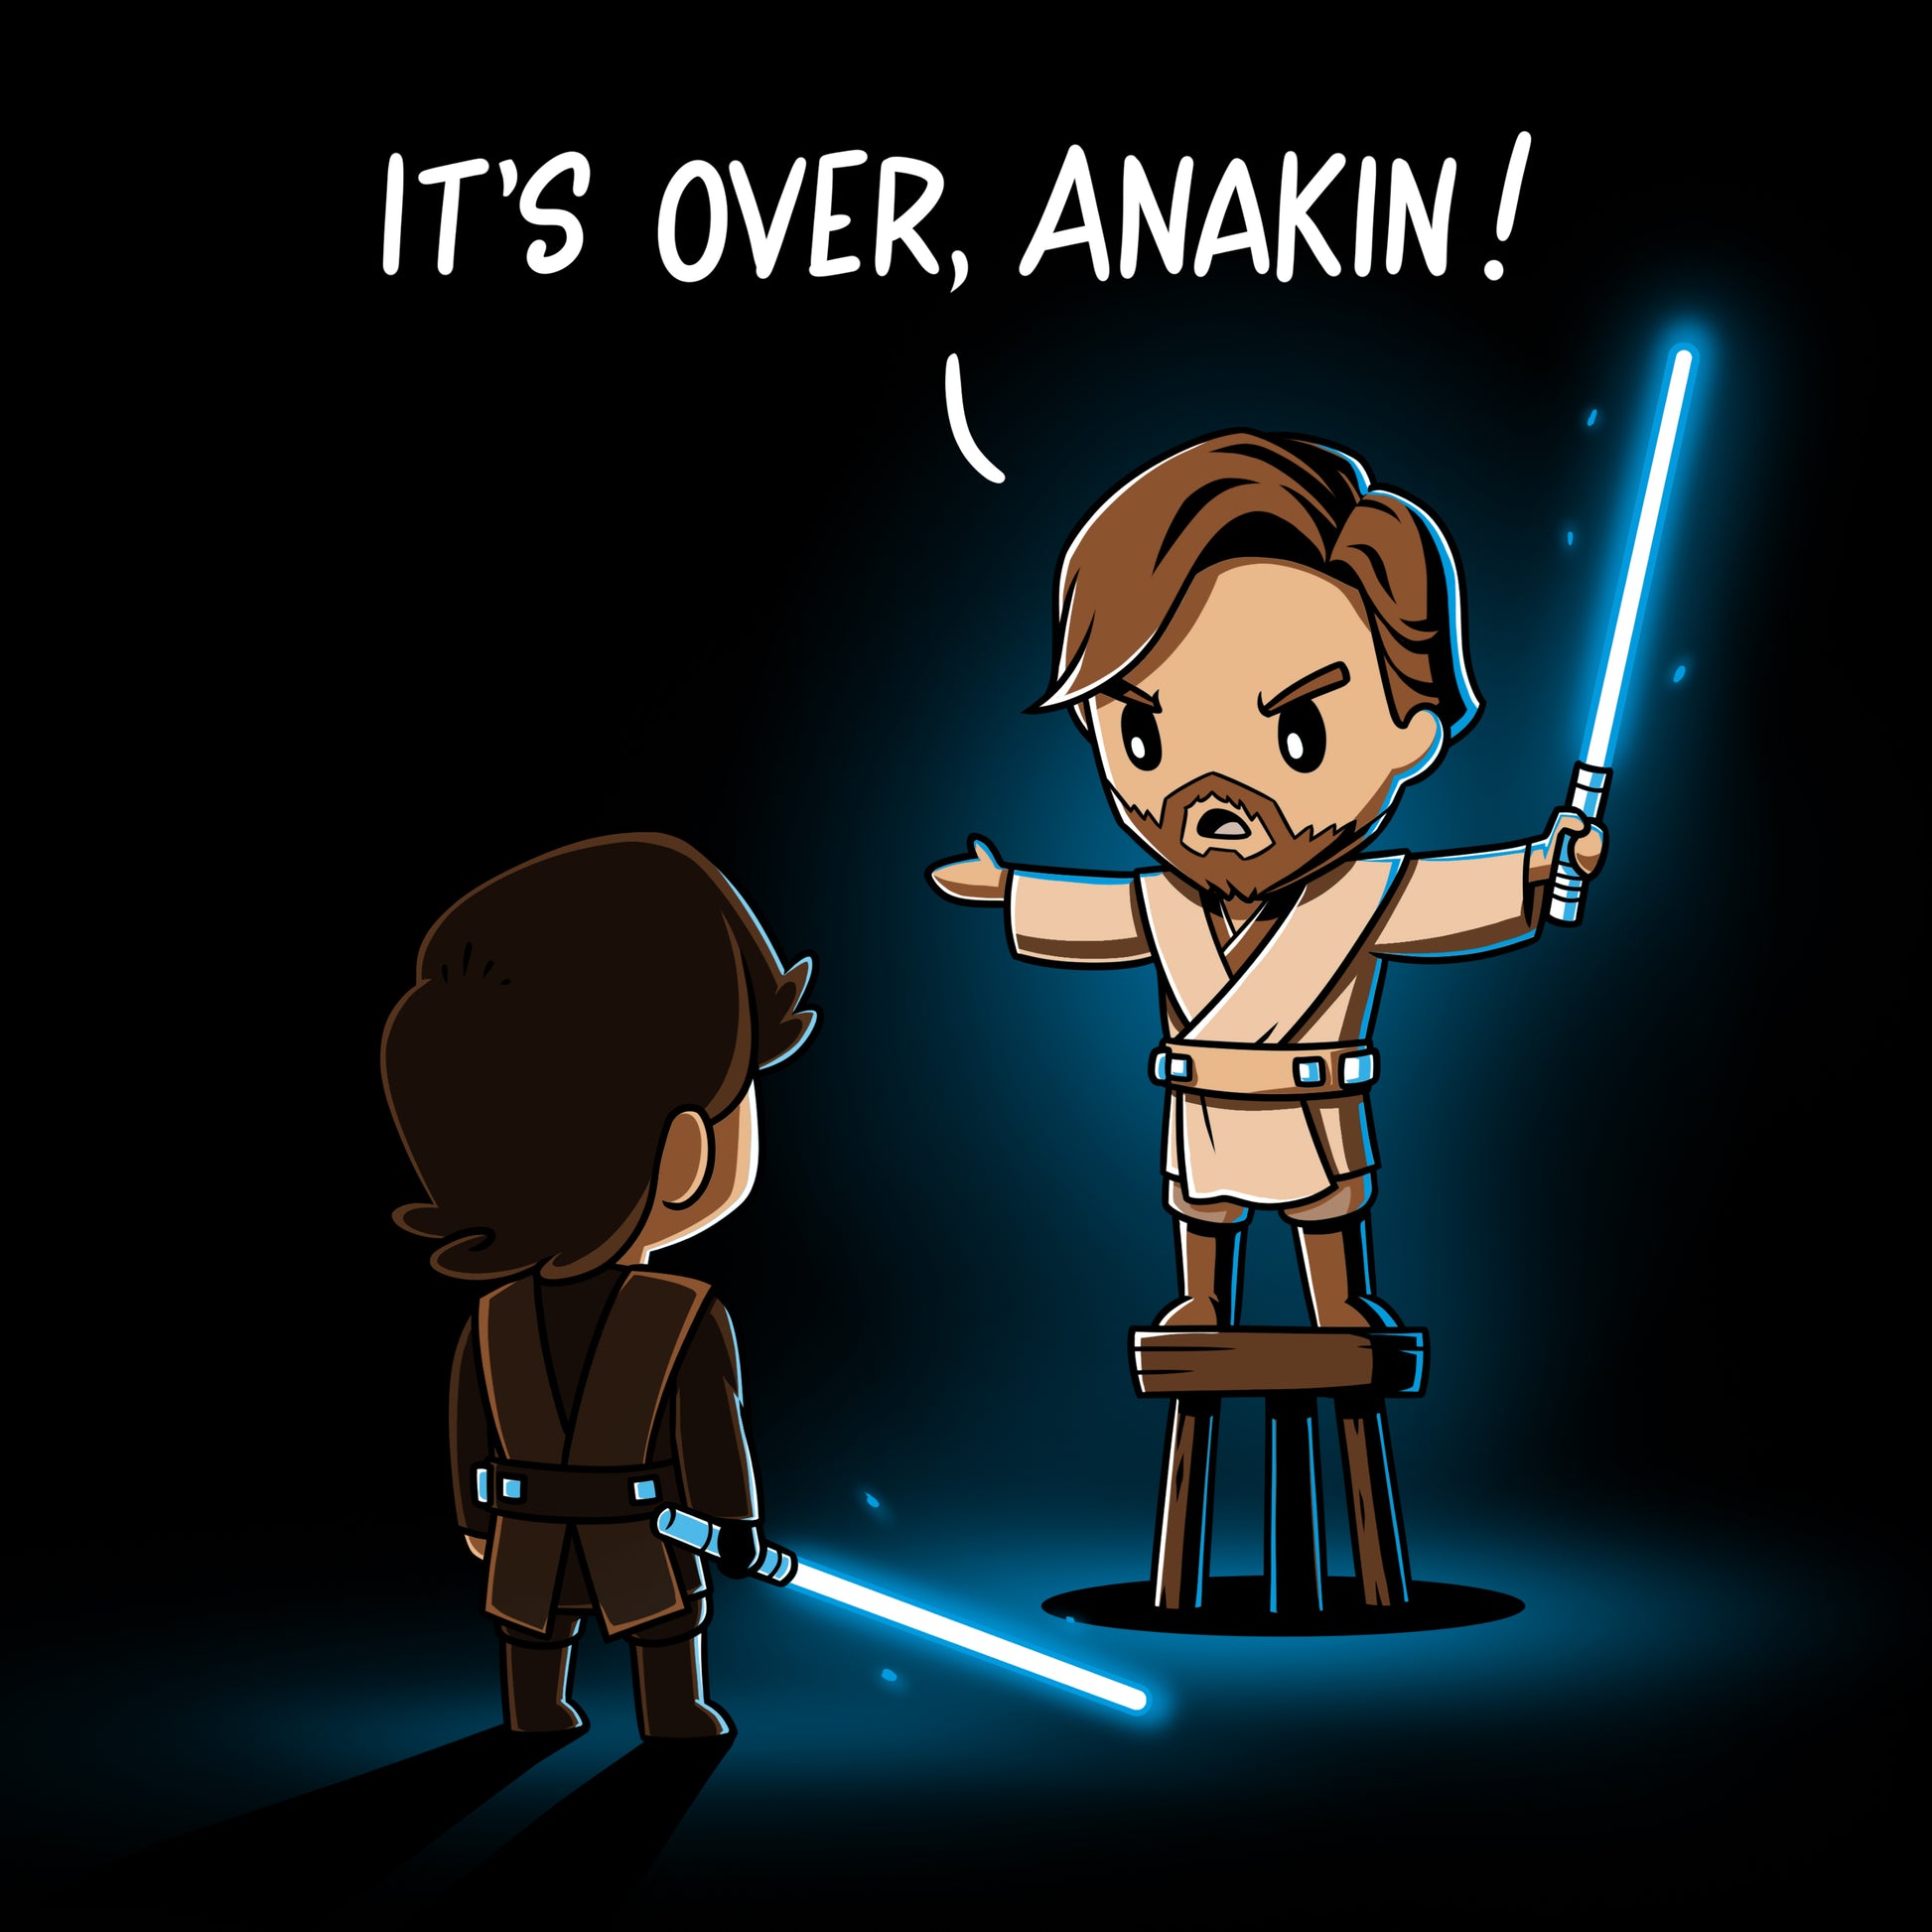 Officially licensed Star Wars "It's Over, Anakin" T-shirt paying homage to their high ground duel.